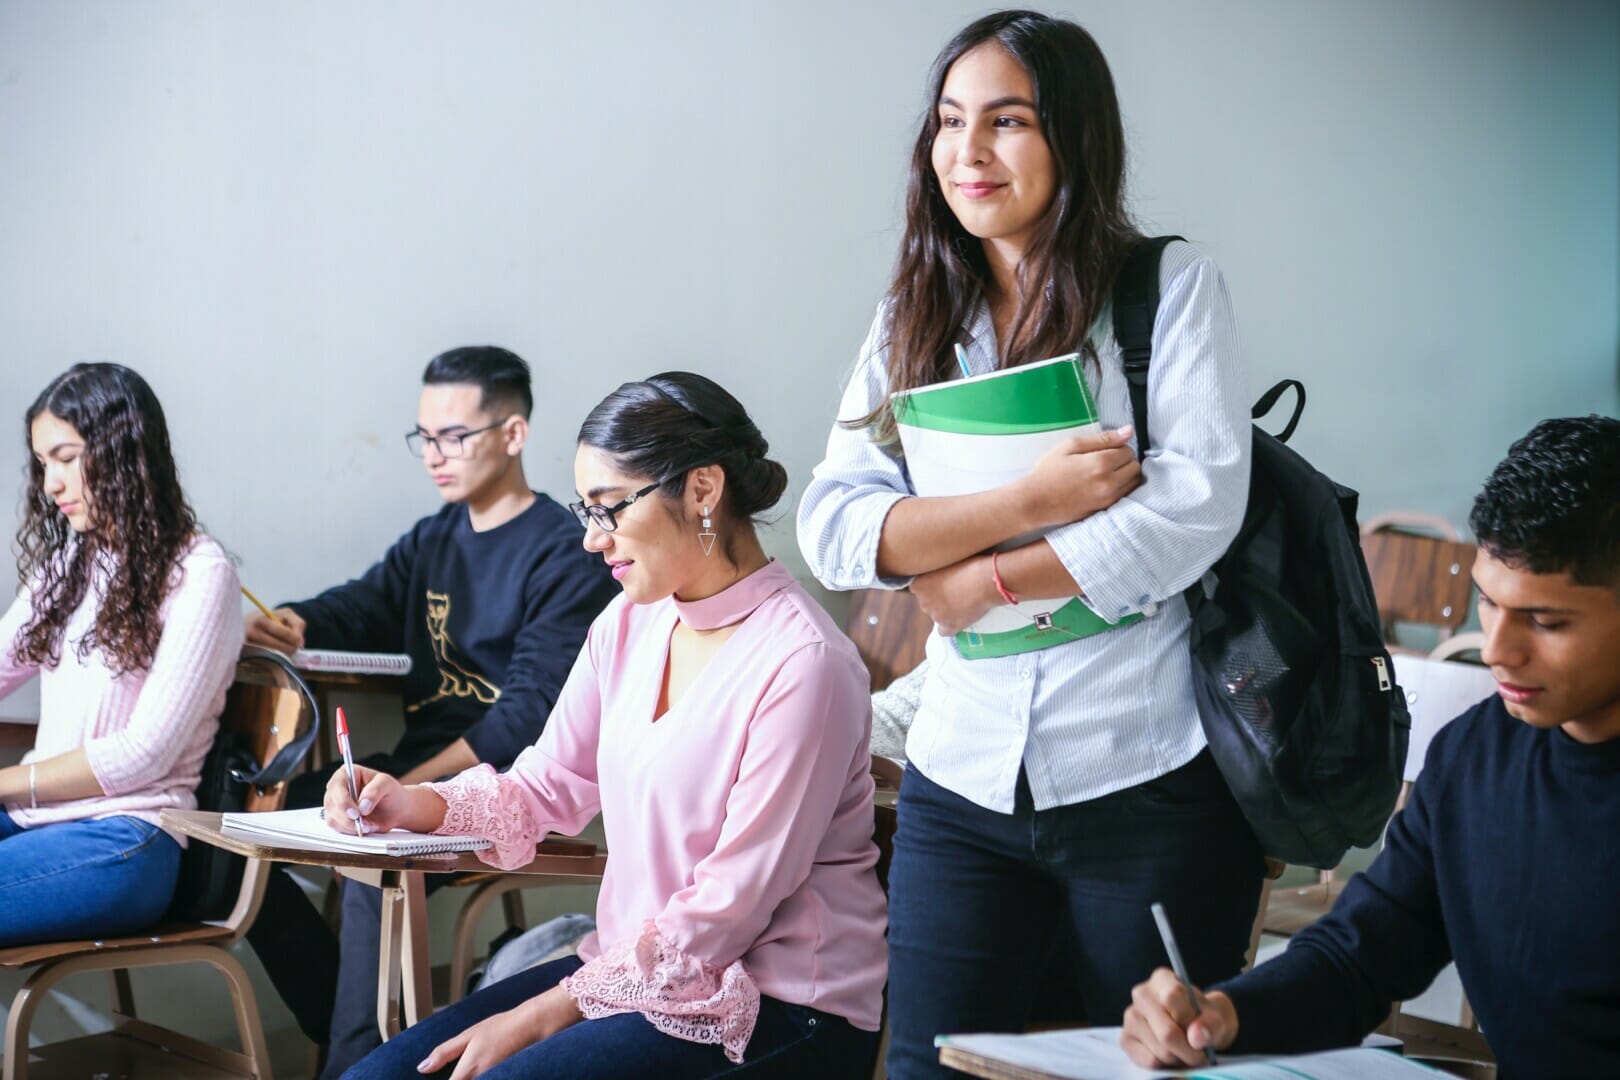 College students in a classroom with a female student standing